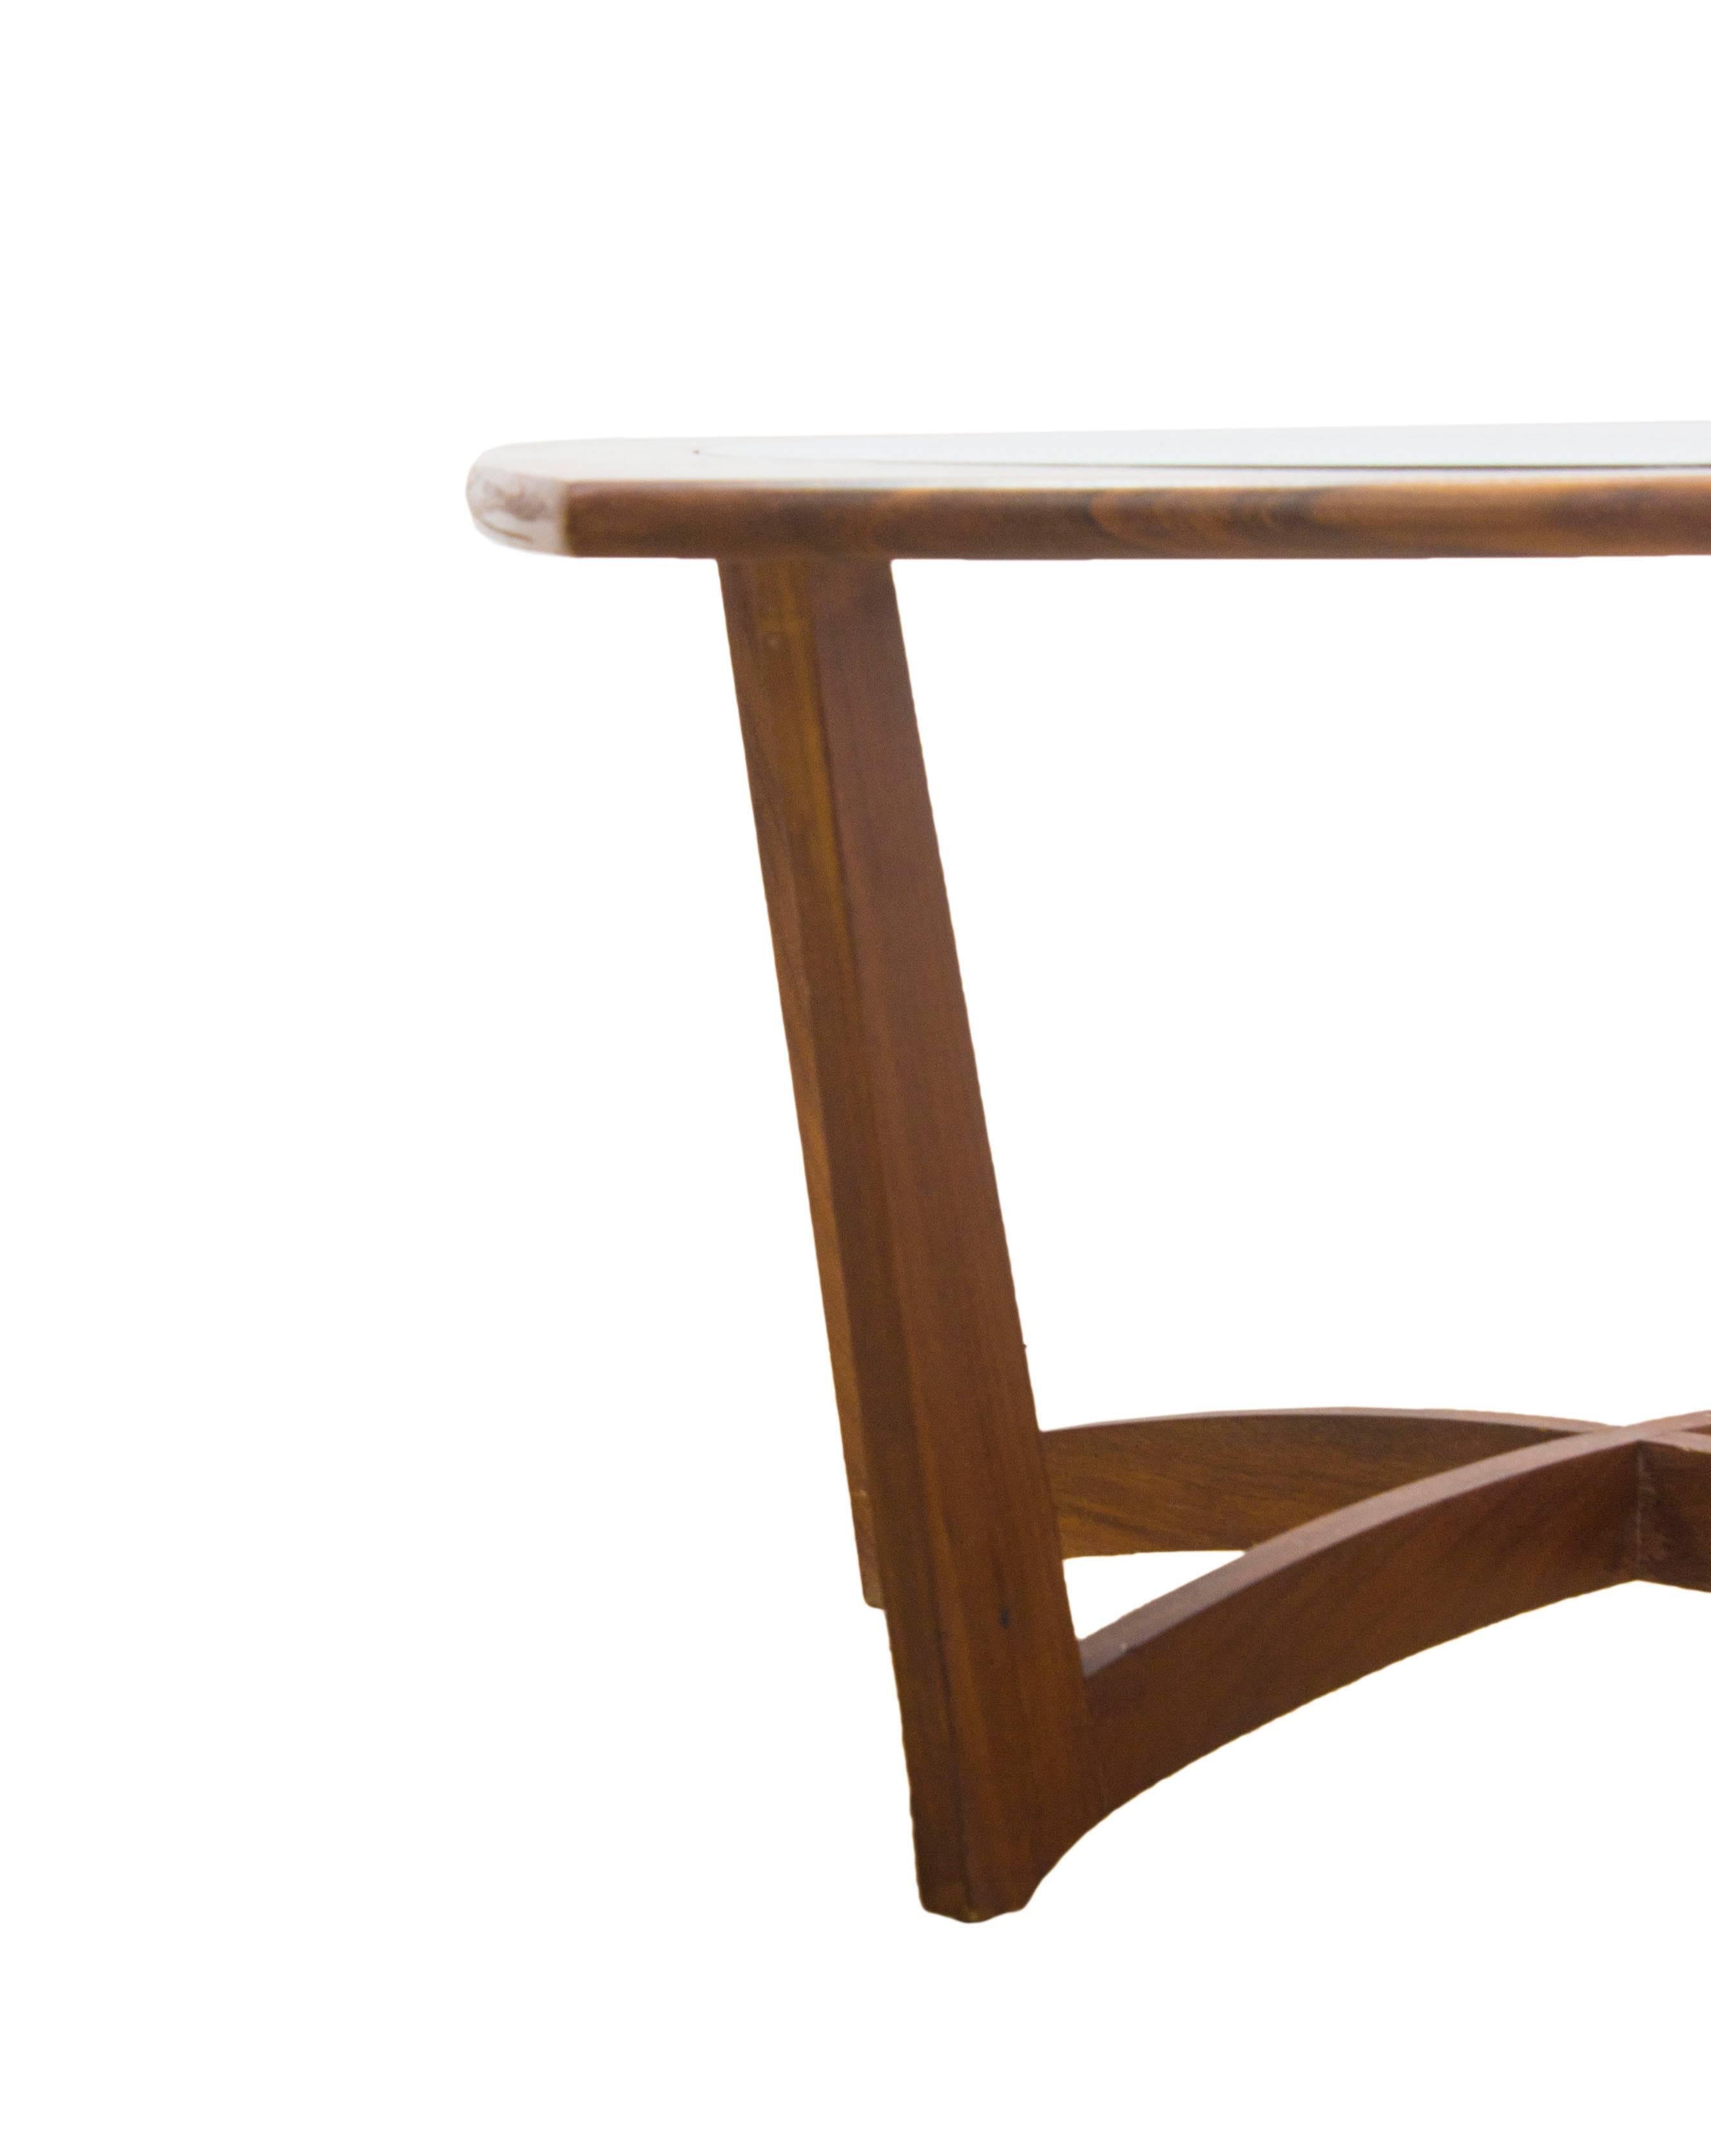 Danish design has always been at the forefront of the Mid Century Movement and its not hard to see why when designs such as this beautiful compact Teak and glass table come to light!

With it’s ample surface perfect for anything from a cup of tea